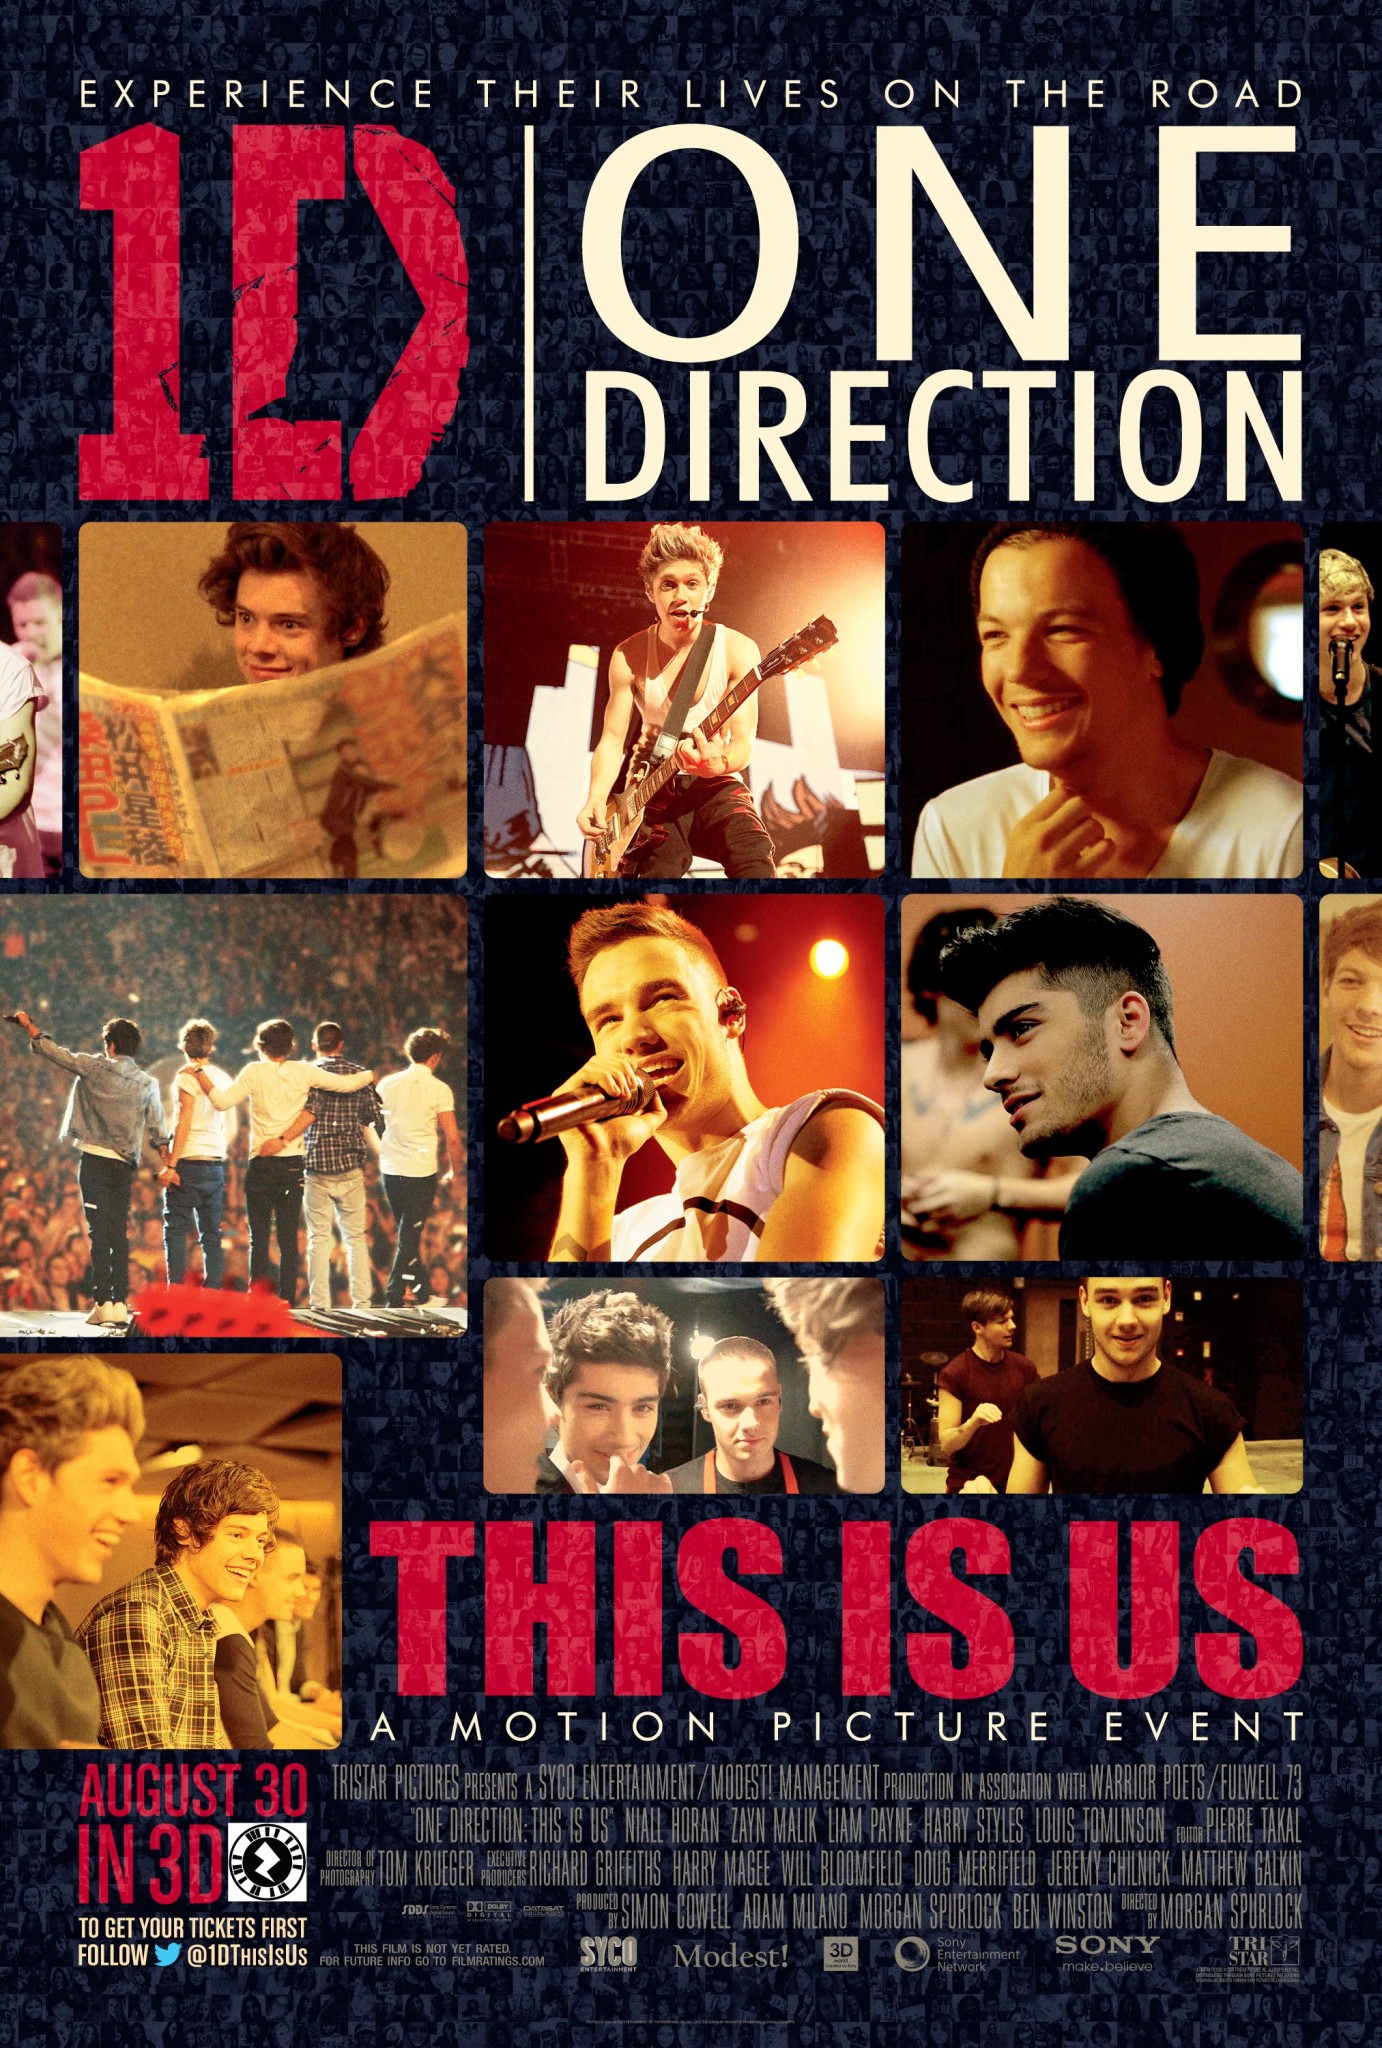 One Direction ‘This Is Us’ movie premiere live stream!